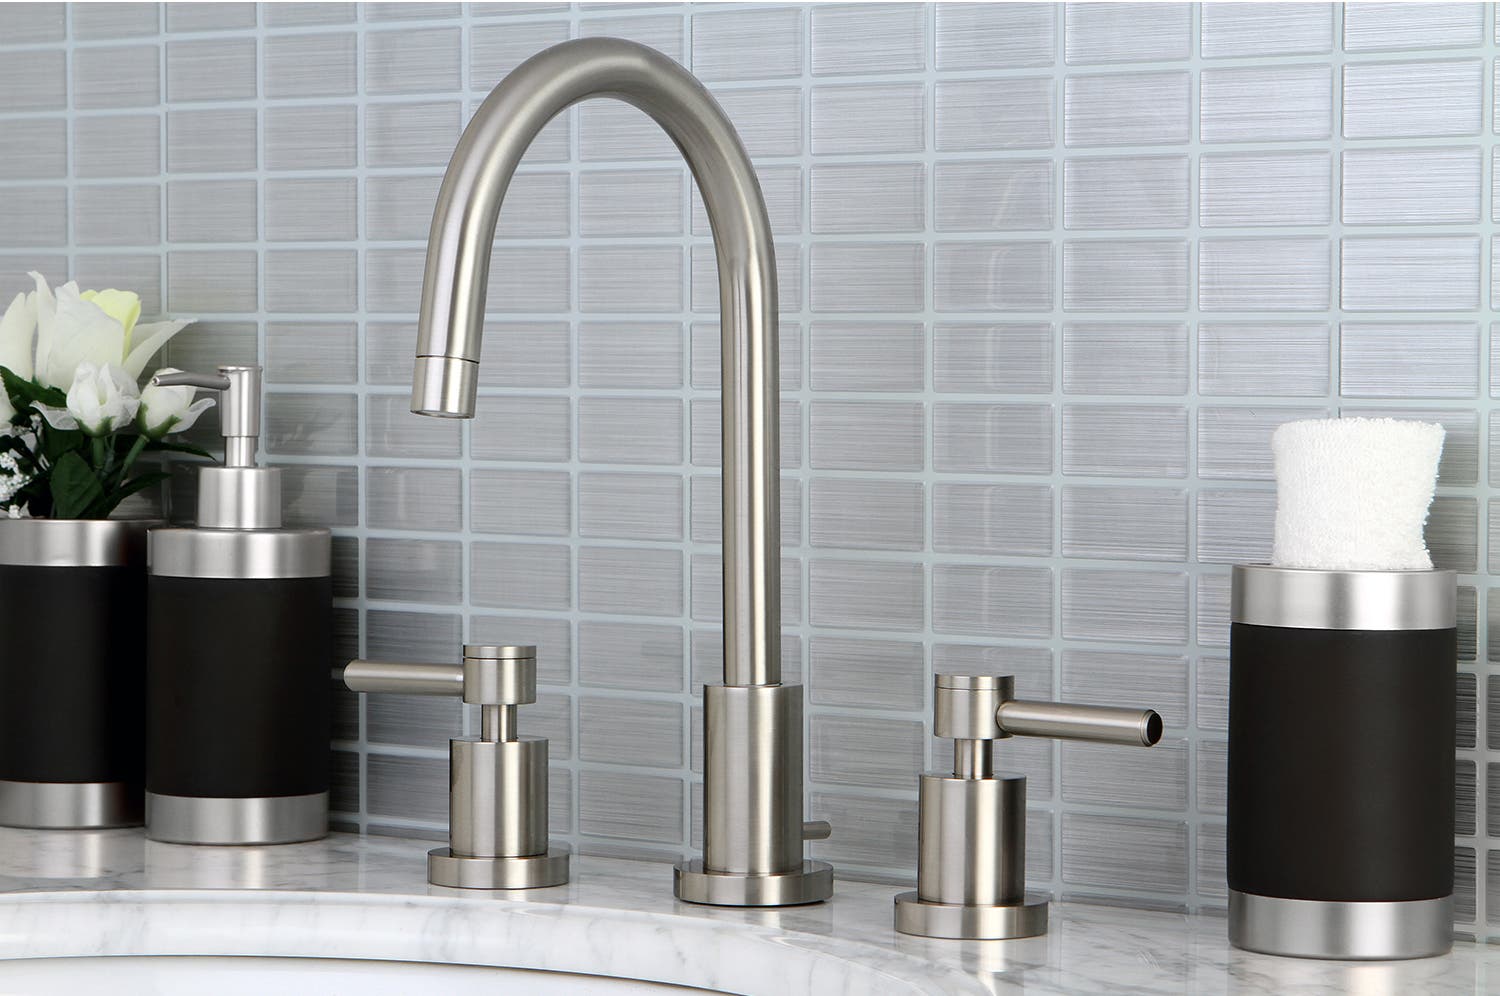 Nothing Small About the Concord Mini-Widespread Bathroom Faucet, KS8958DL